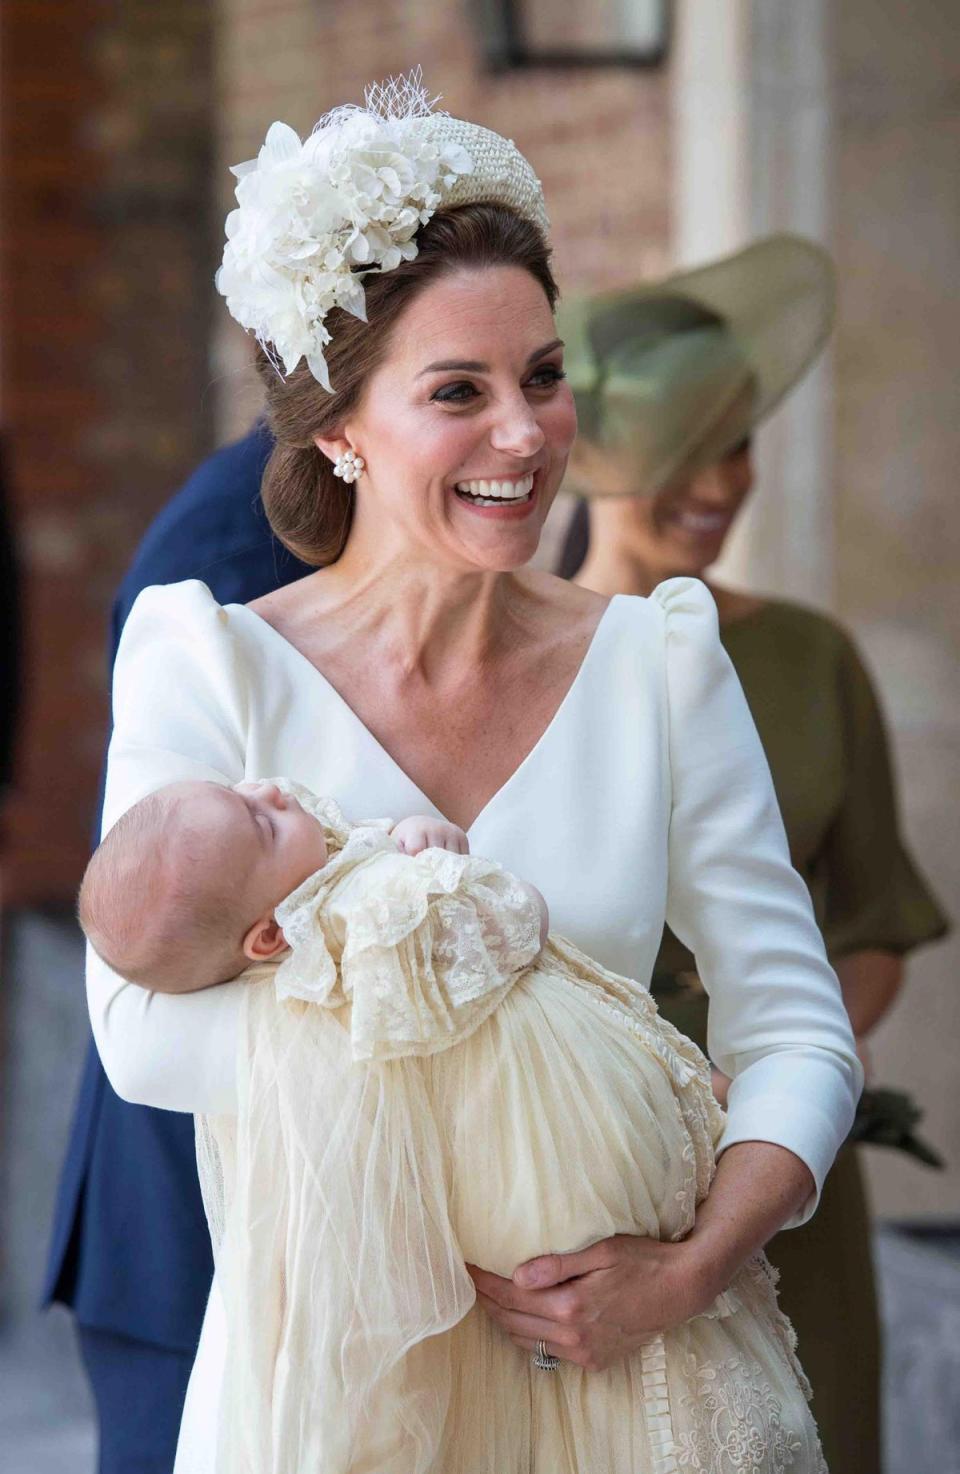 Prince Louis, 2018: On 9 July 2018, the Duchess of Cambridge was seen arriving at the Chapel Royal, St James’s Palace, London with her family carrying Prince Louis.For the occasion, the mother-of-three wore a simple white Alexander McQueen dress with puffed sleeves and a midi-length hem. She coordinated her outfits with a cream applique headband, known as the Cassandra, by milliner Jane Taylor. Prince Louis, meanwhile, was dressed in a replica of the Royal Christening Robe which was hand made by Angela Kelly, dressmaker to the Queen. On arriving at the chapel, Kate Middleton told the Archbishop of Canterbury that Prince Louis was 'very relaxed and peaceful', adding 'I hope he stays like this’. (AFP/Getty Images)